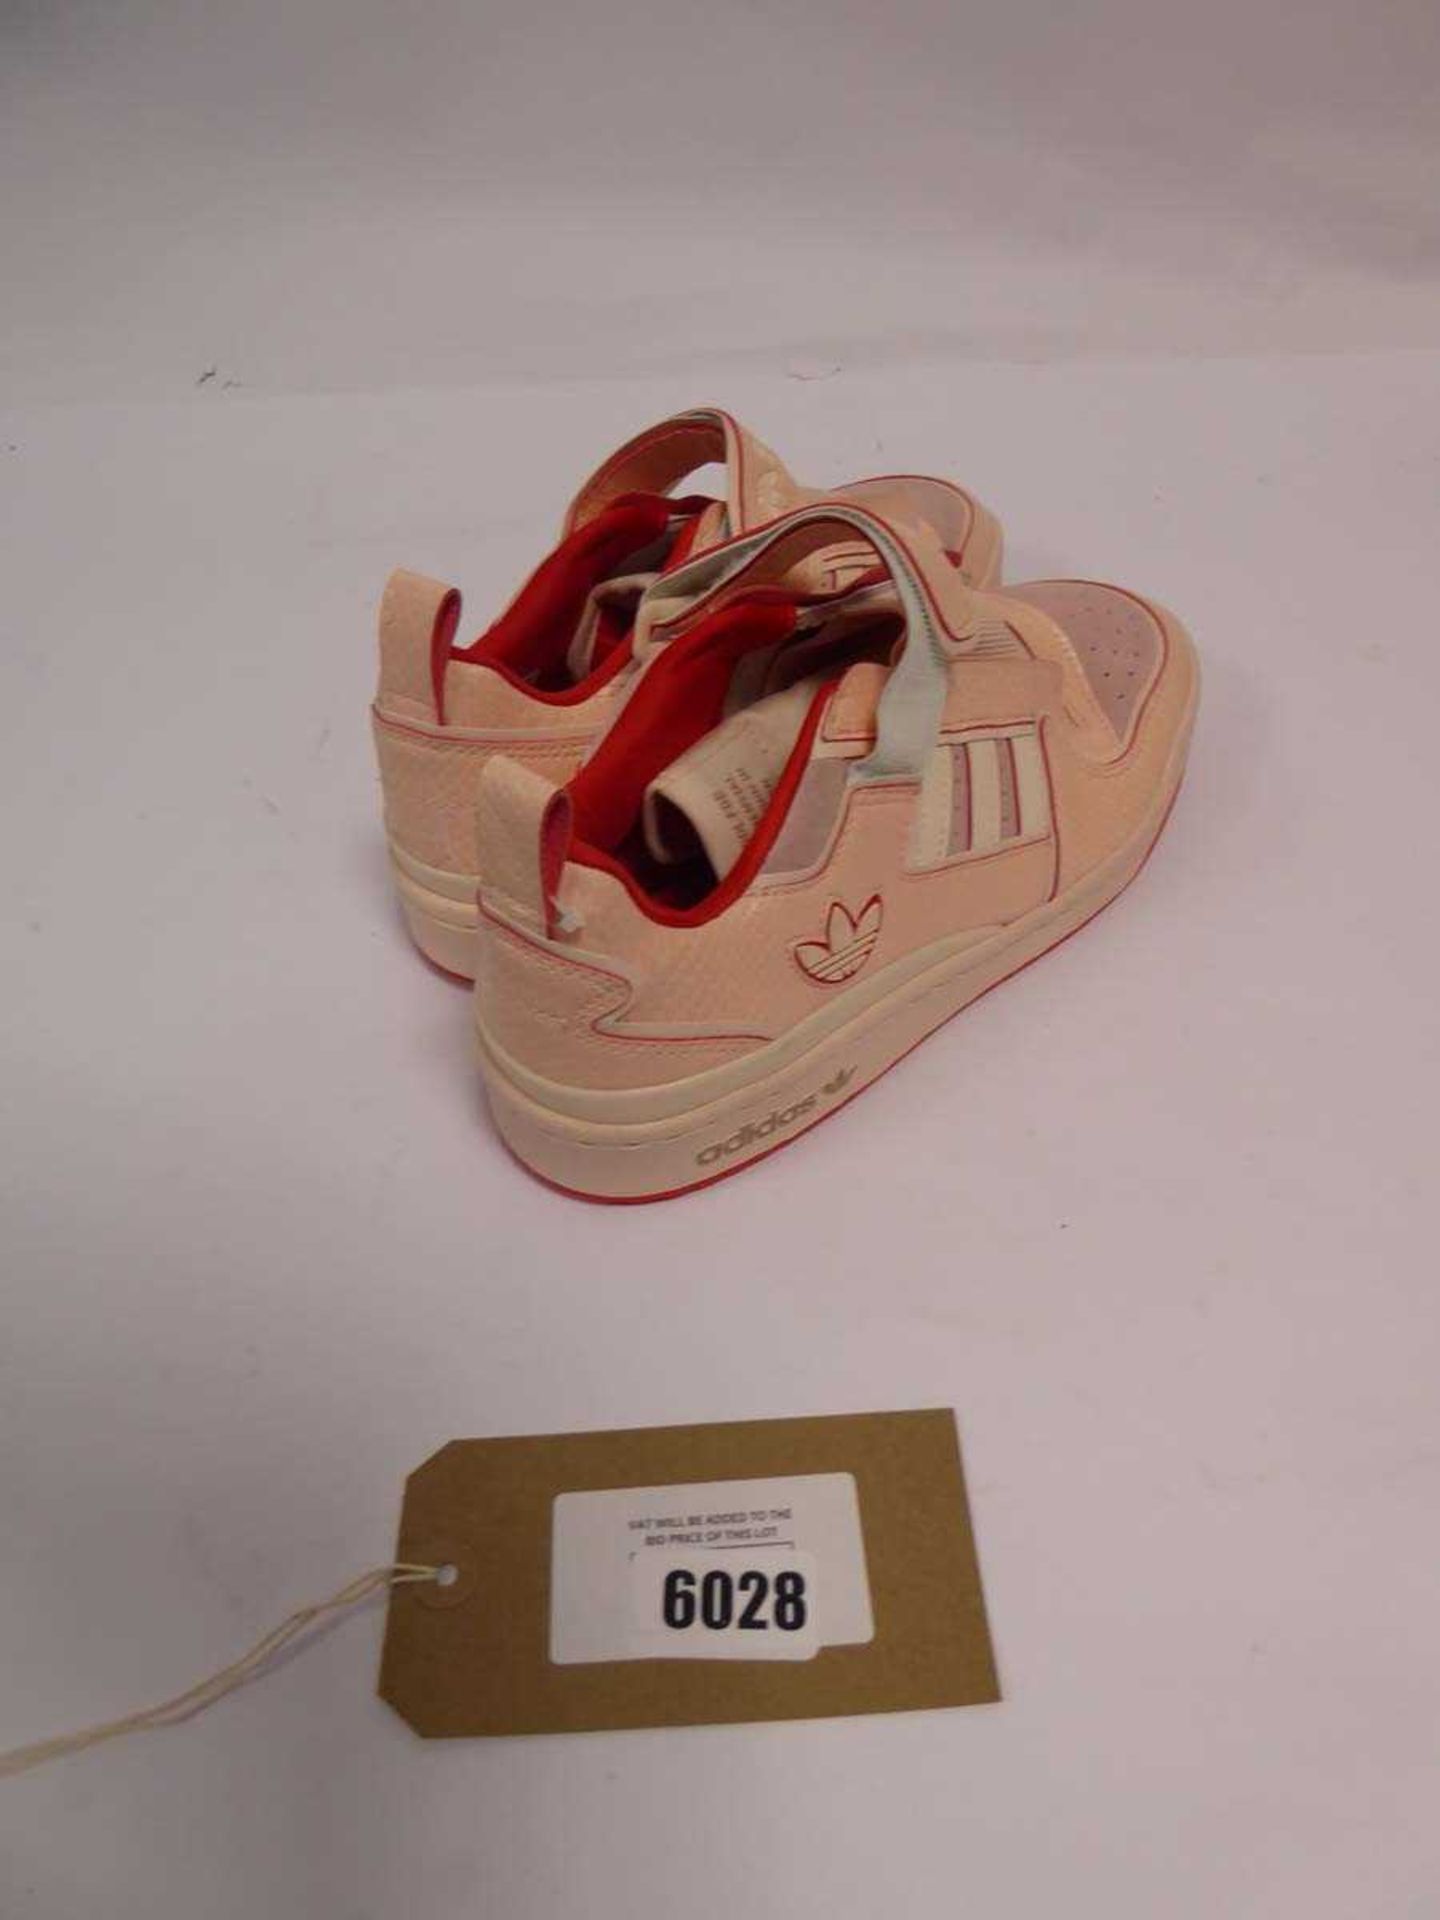 +VAT Unboxed pair of Adidas forum plus pink S.E.E.D trainers, size 6.5 - Image 2 of 3